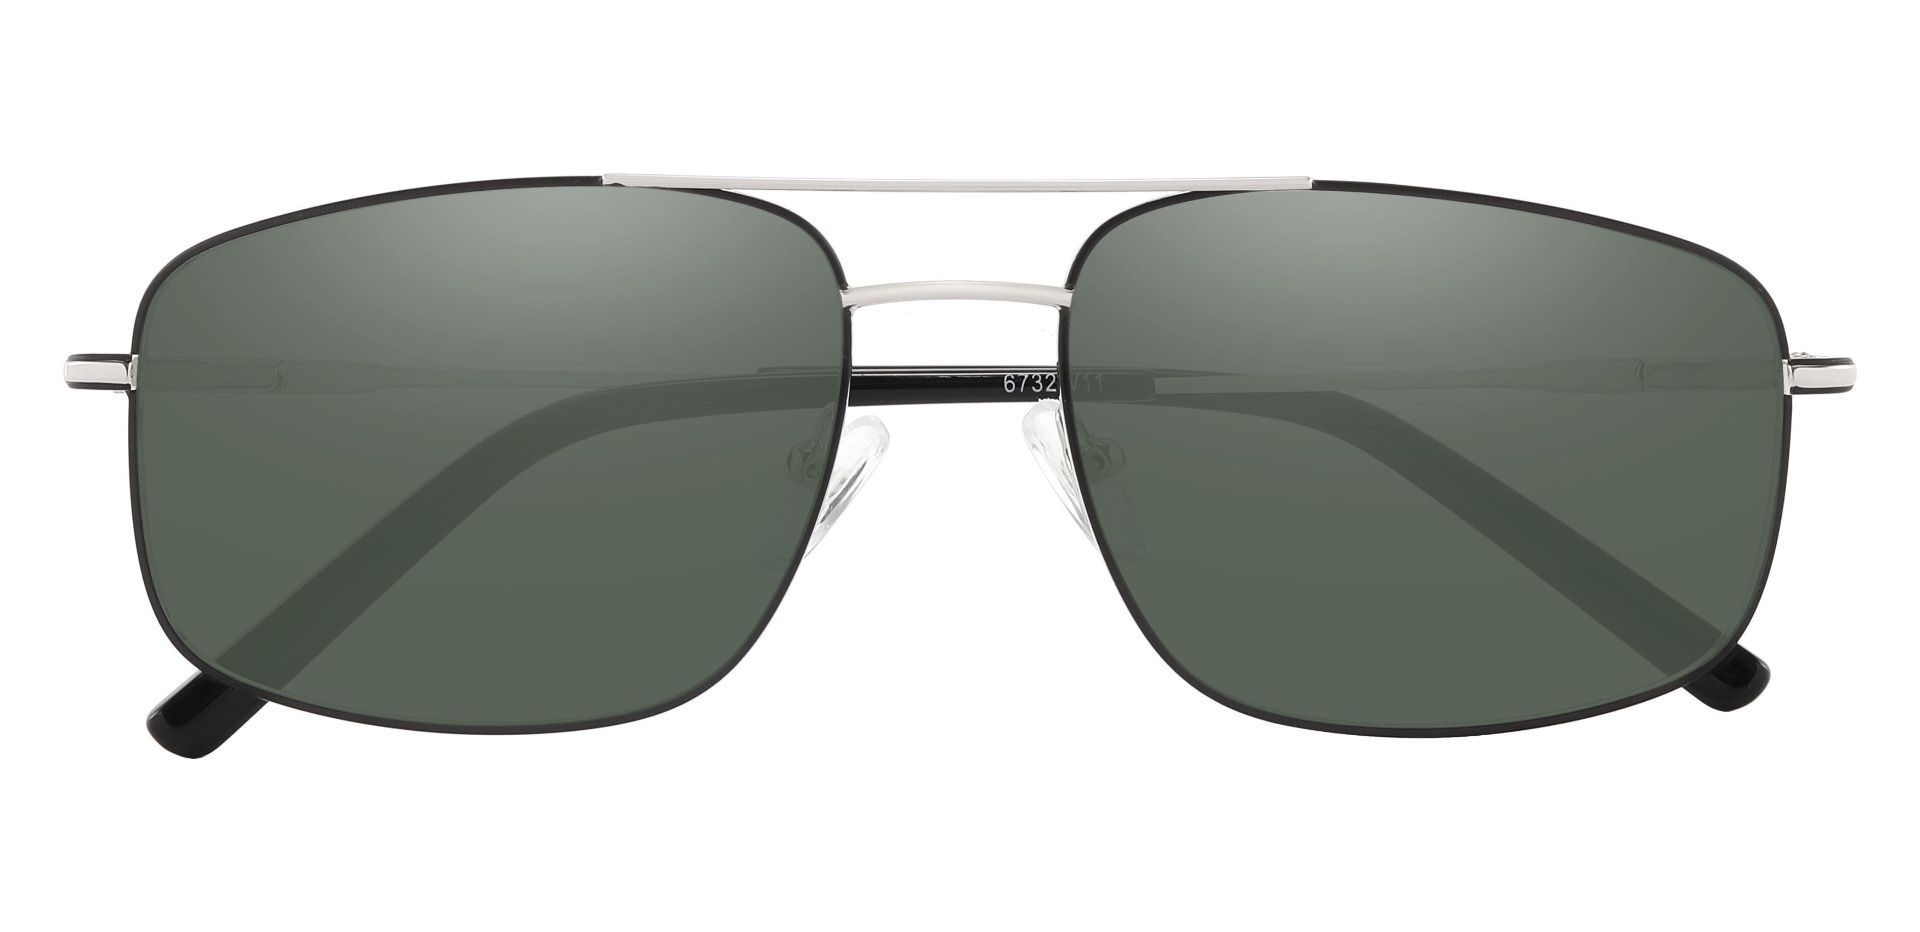 Turner Aviator Non-Rx Sunglasses - Silver Frame With Green Lenses